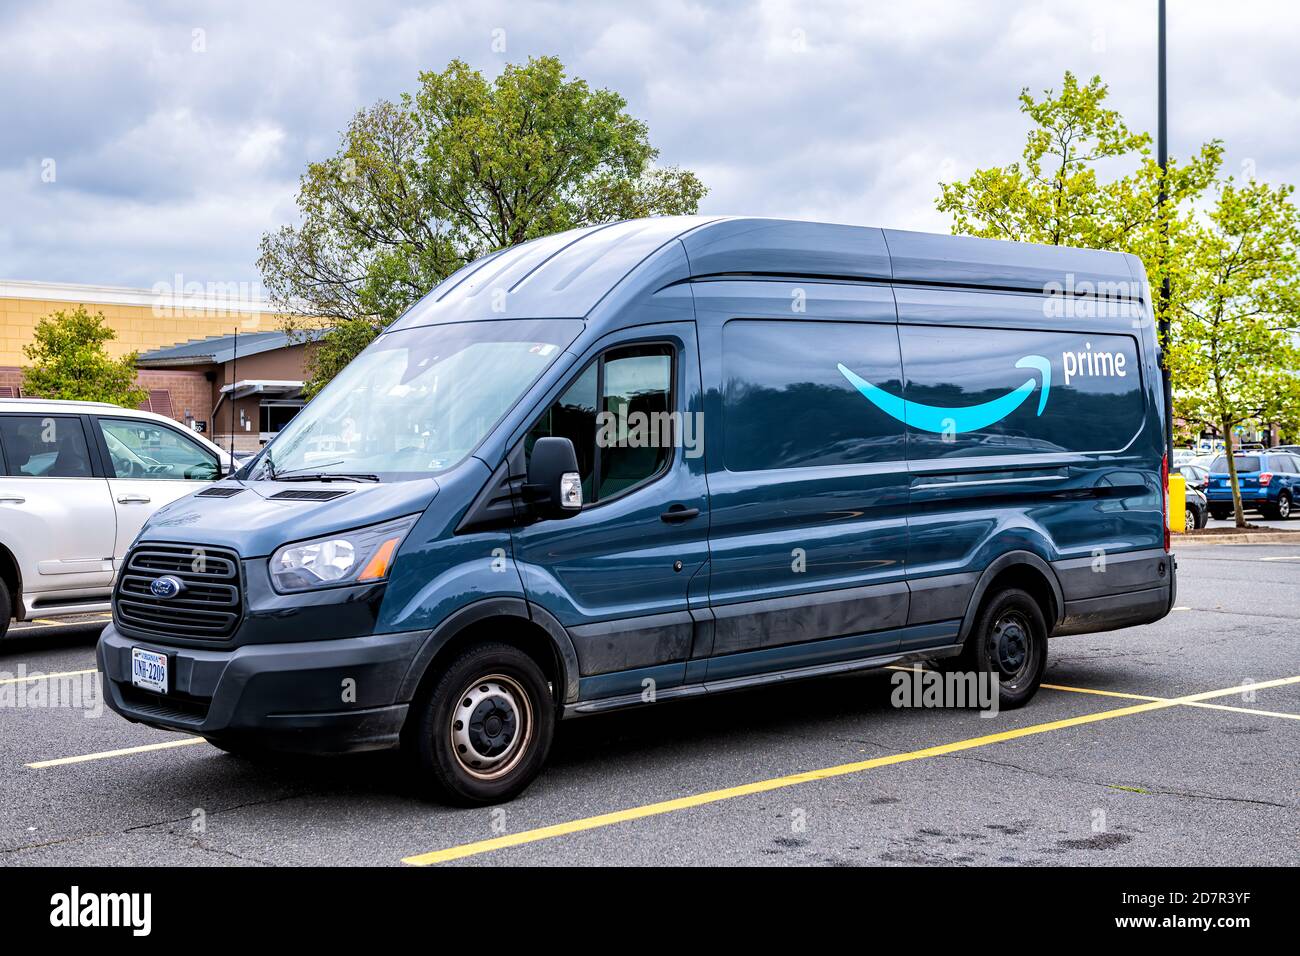 Amazon Delivery Van High Resolution Stock Photography and Images - Alamy